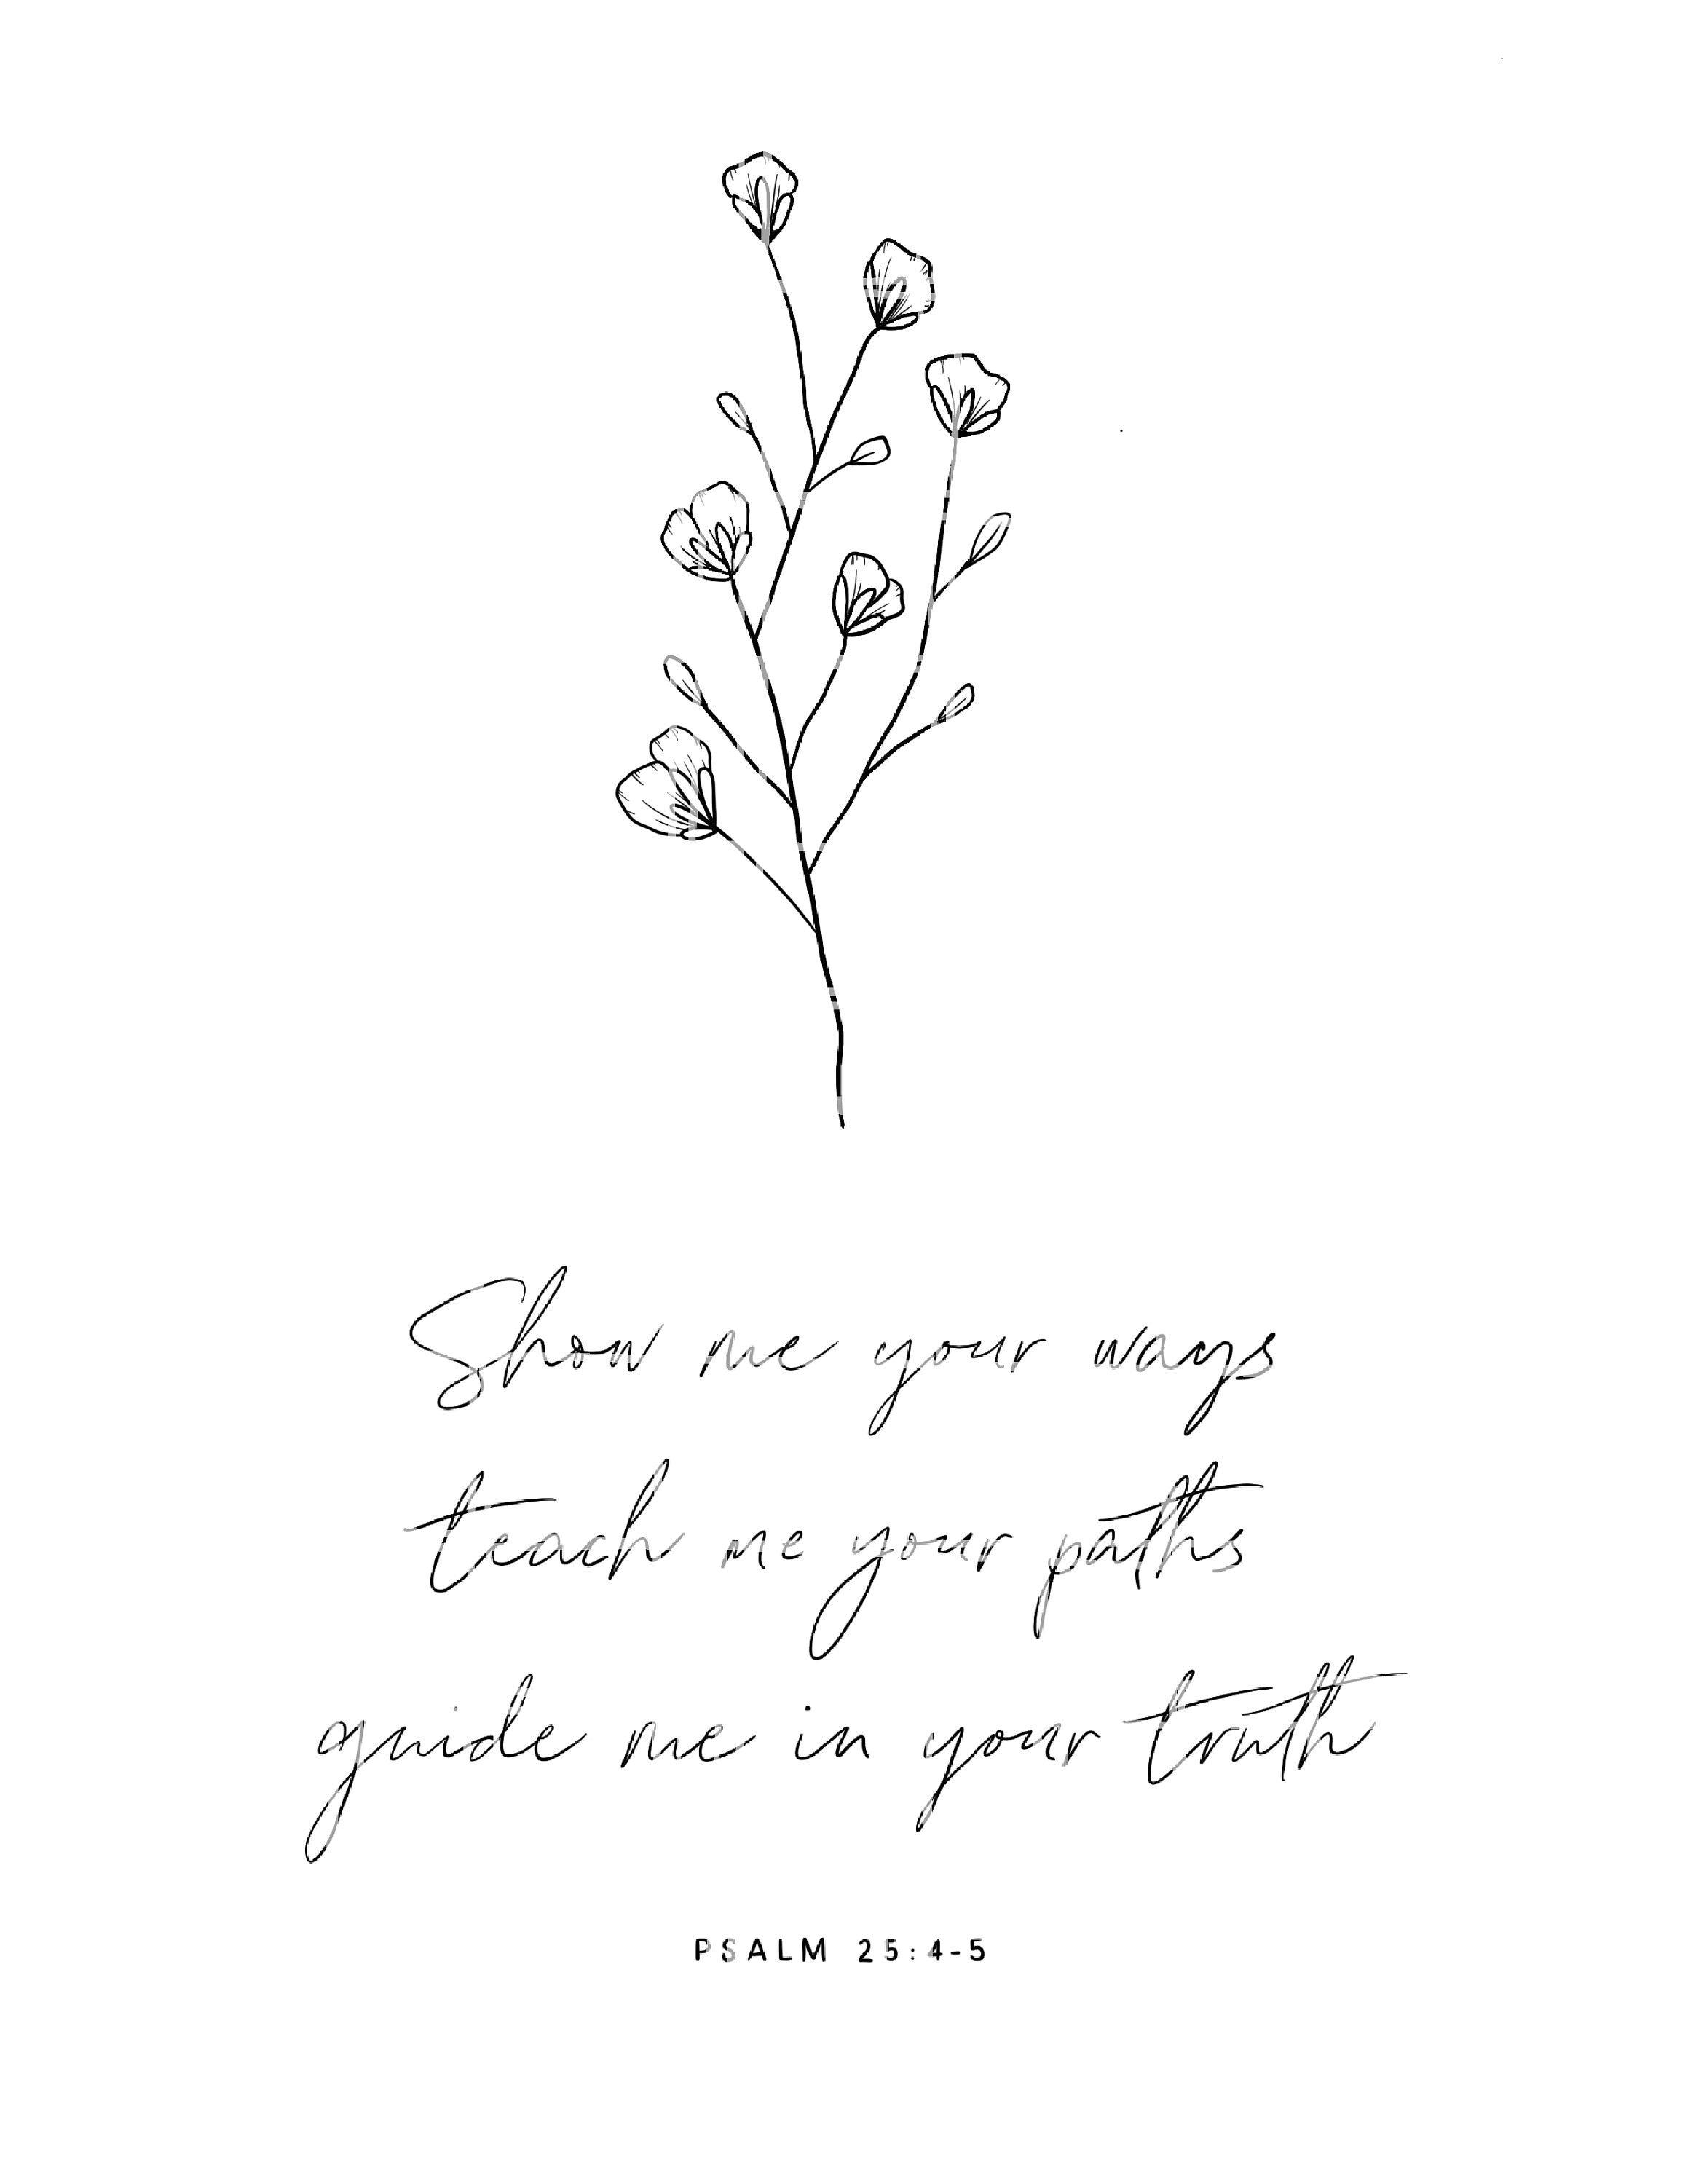 Psalms 254 5 Calligraphy and Small Flower Branch Digital Art   Etsy